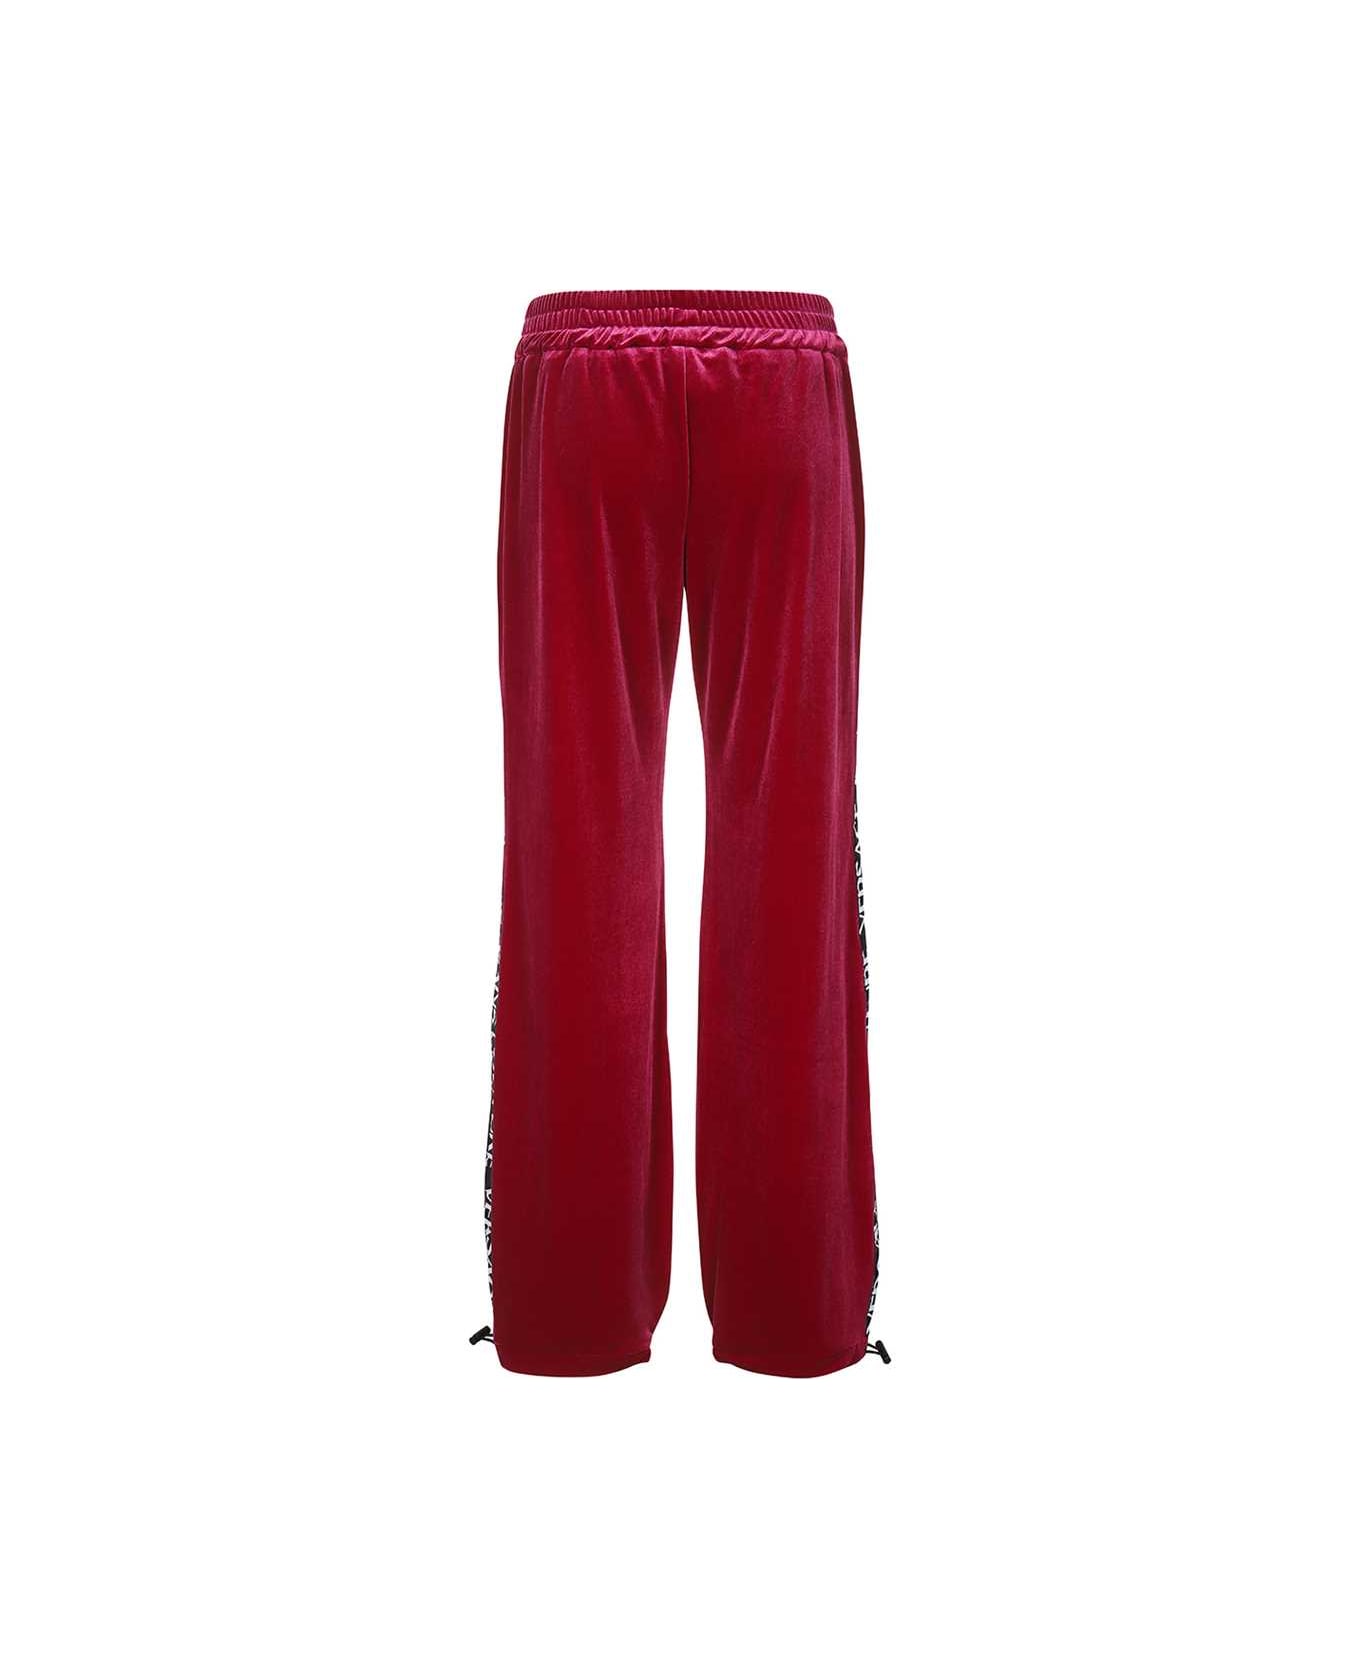 Versace Jeans Couture Velvet Trousers - Burgundy